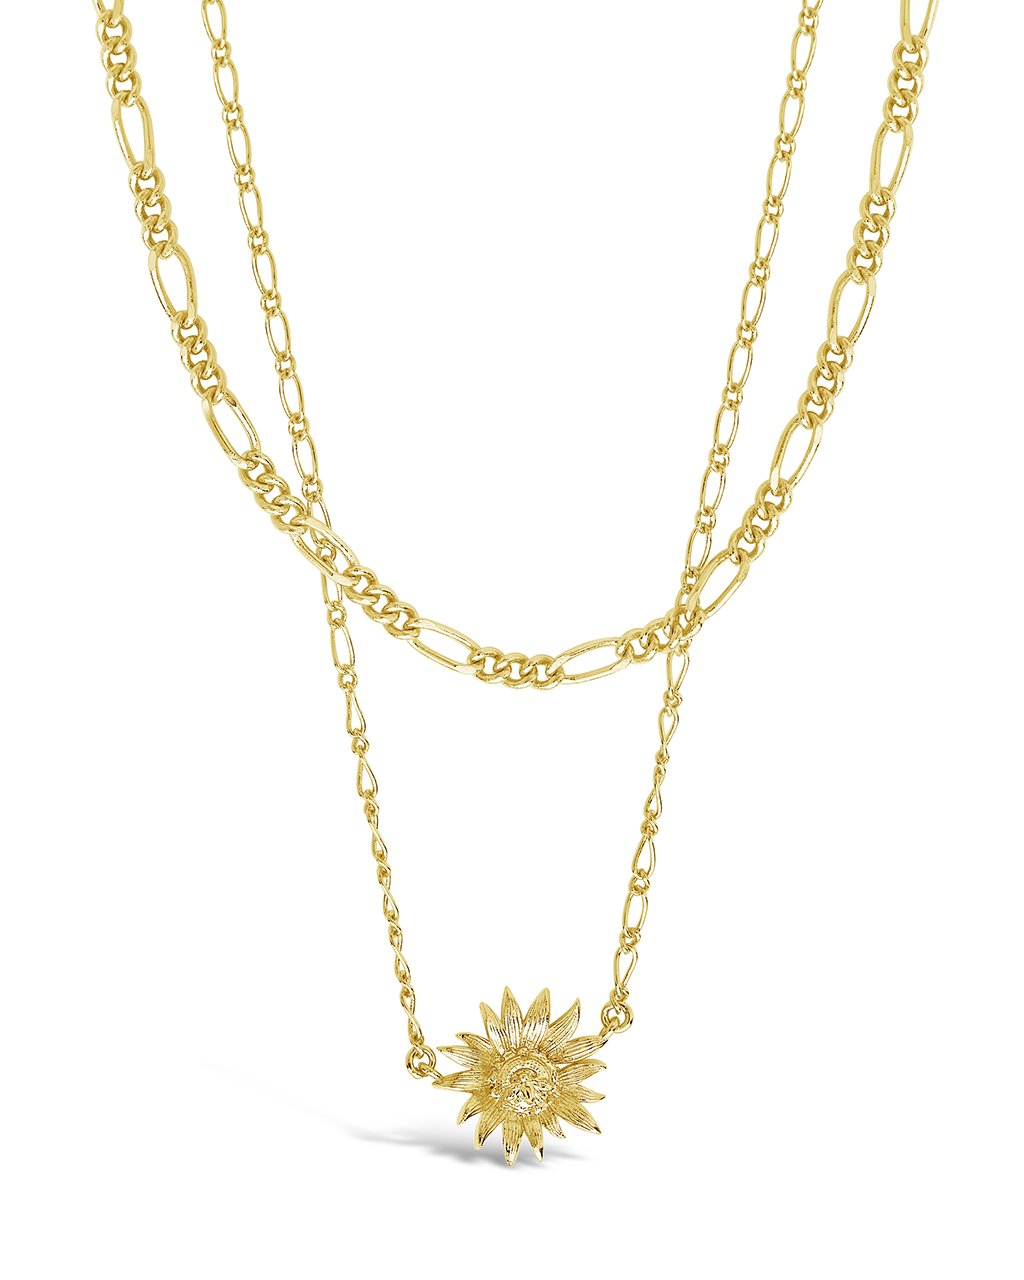 Pollinator Layered Necklace Necklace Sterling Forever Gold 